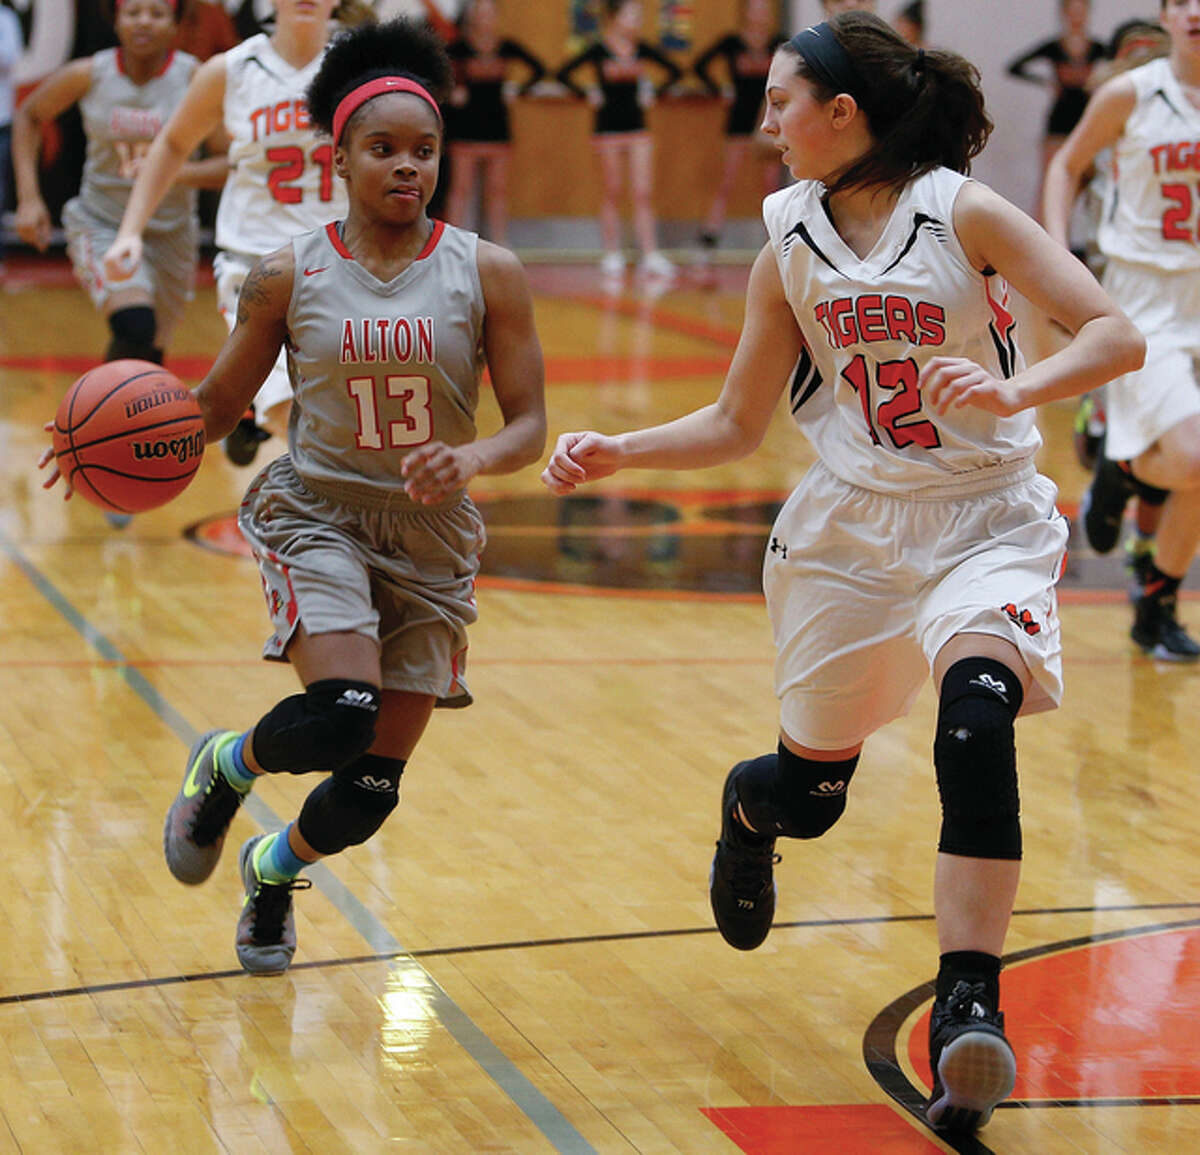 Alton’s LaJarvia Brown (left) drives to the basket while Edwardsville’s Makenzie Silvey defends during Friday night’s Southwestern Conference girls basketball game at Lucco-Jackson Gym in Edwardsville.